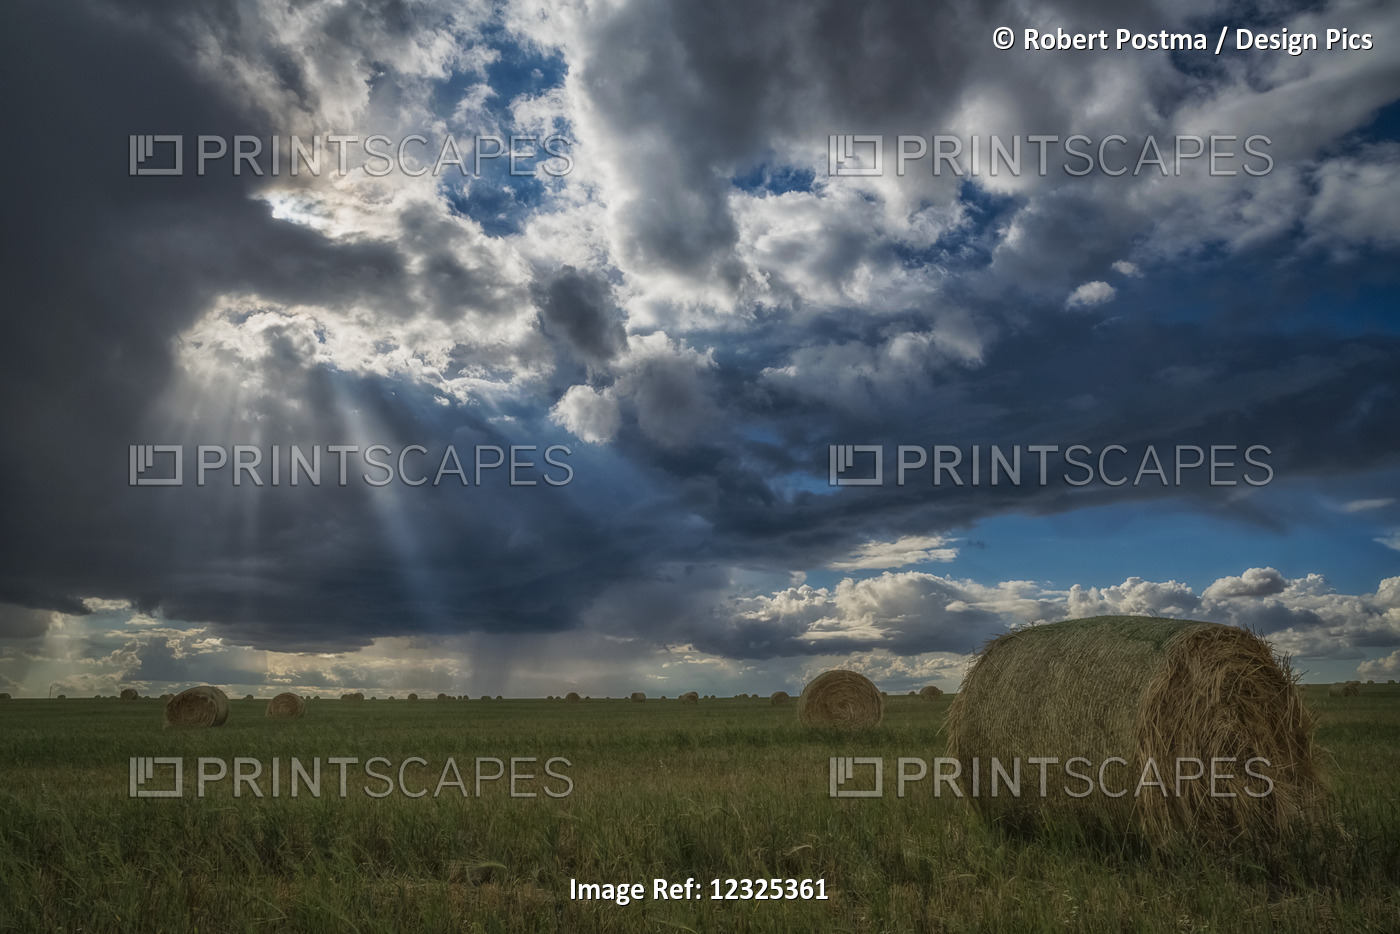 Sunlight Breaks Through The Storm Clouds Over A Field Of Hay Bales; ...